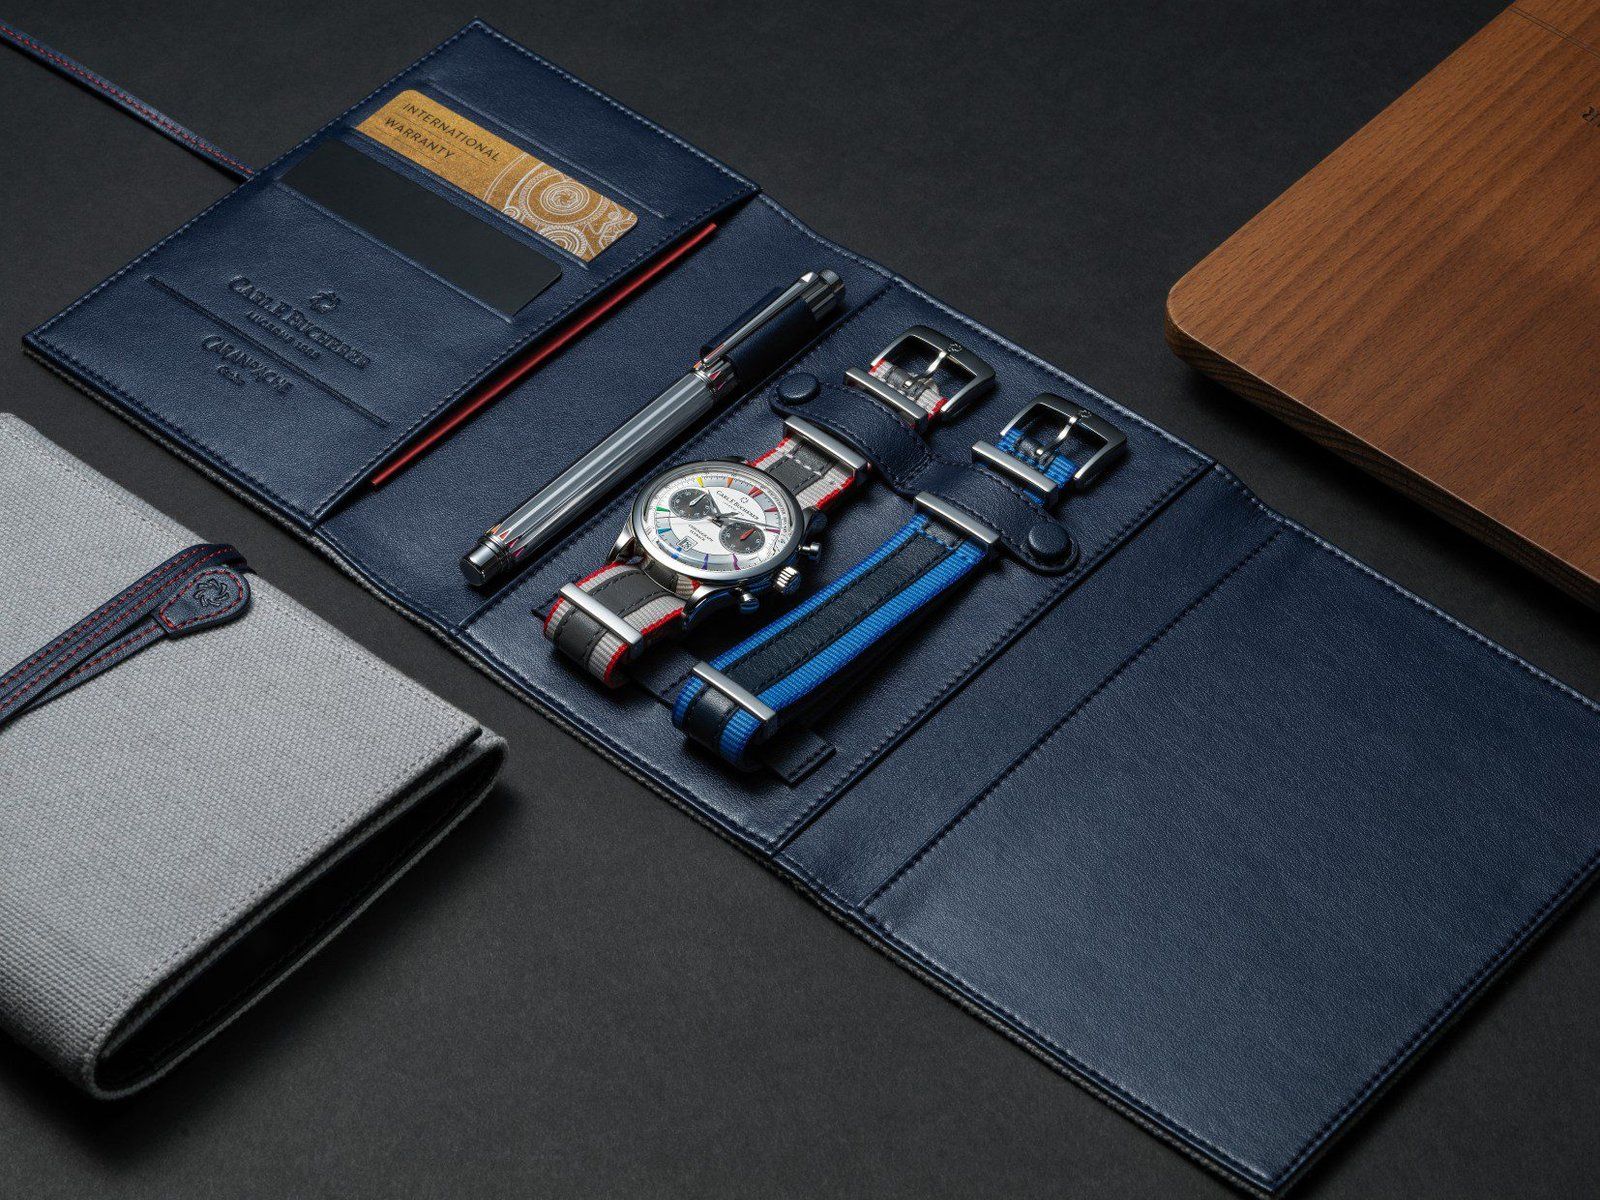 Carl F. Bucherer Manero Flyback Signature watch and the Caran d'Ache Signature rollerball pen packaging